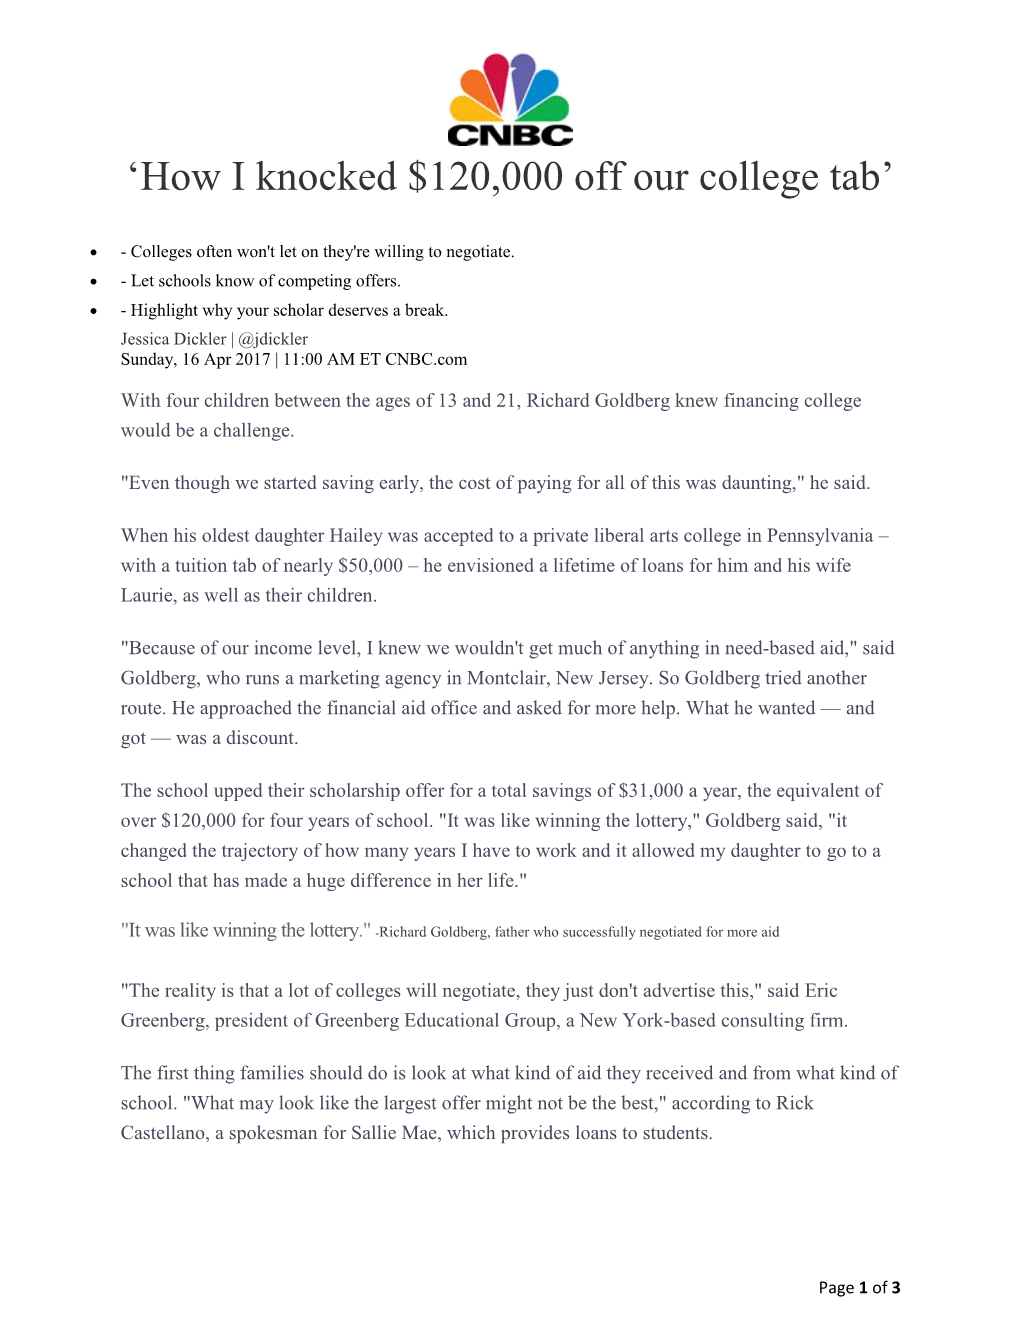 'How I Knocked $120,000 Off Our College Tab'